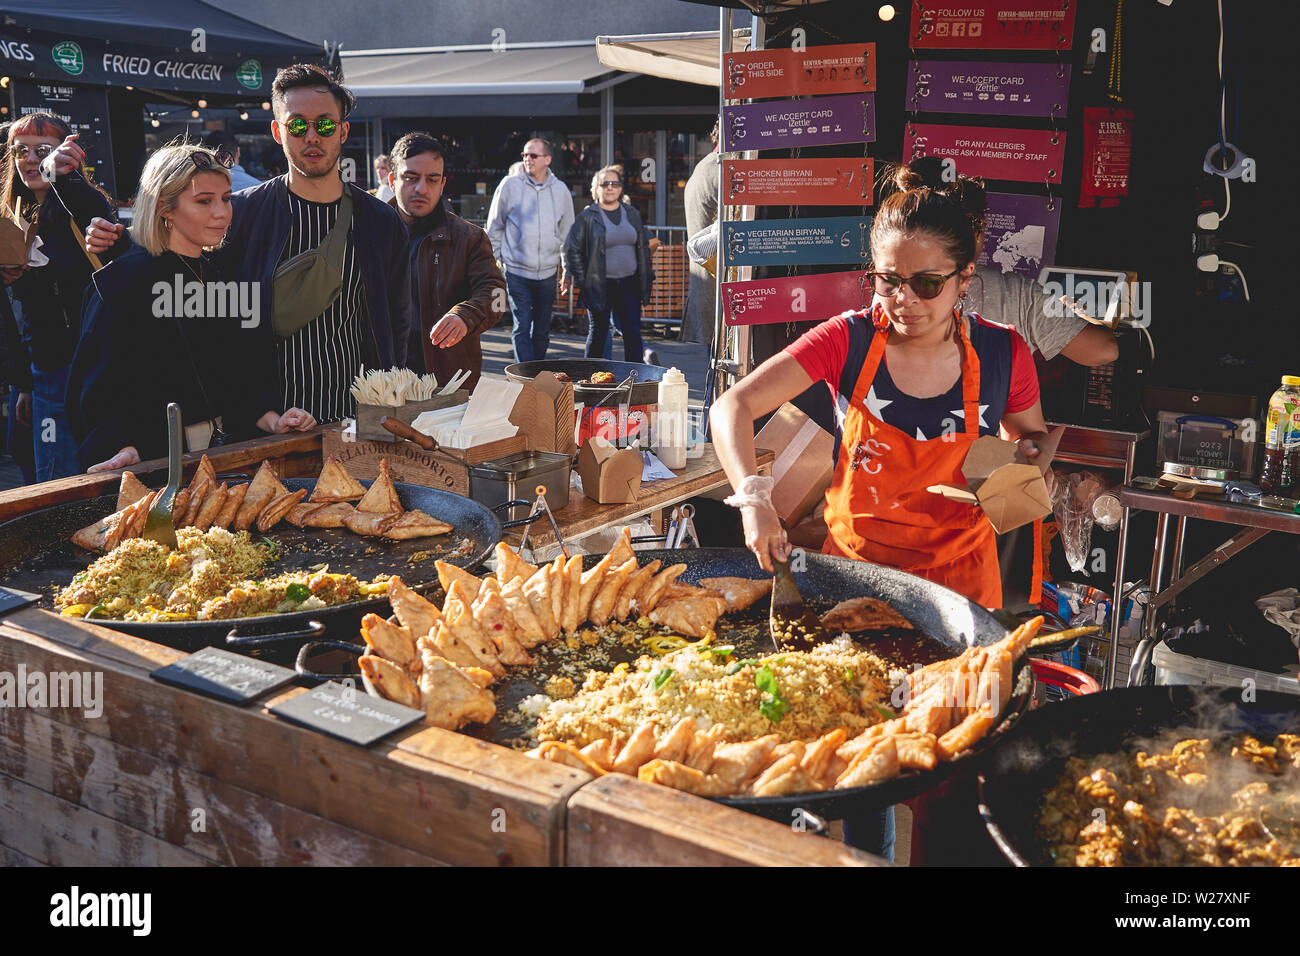 London, UK - March, 2019. An Indian street food stall in a food market near the Royal Festival hall in Southbank. Stock Photo